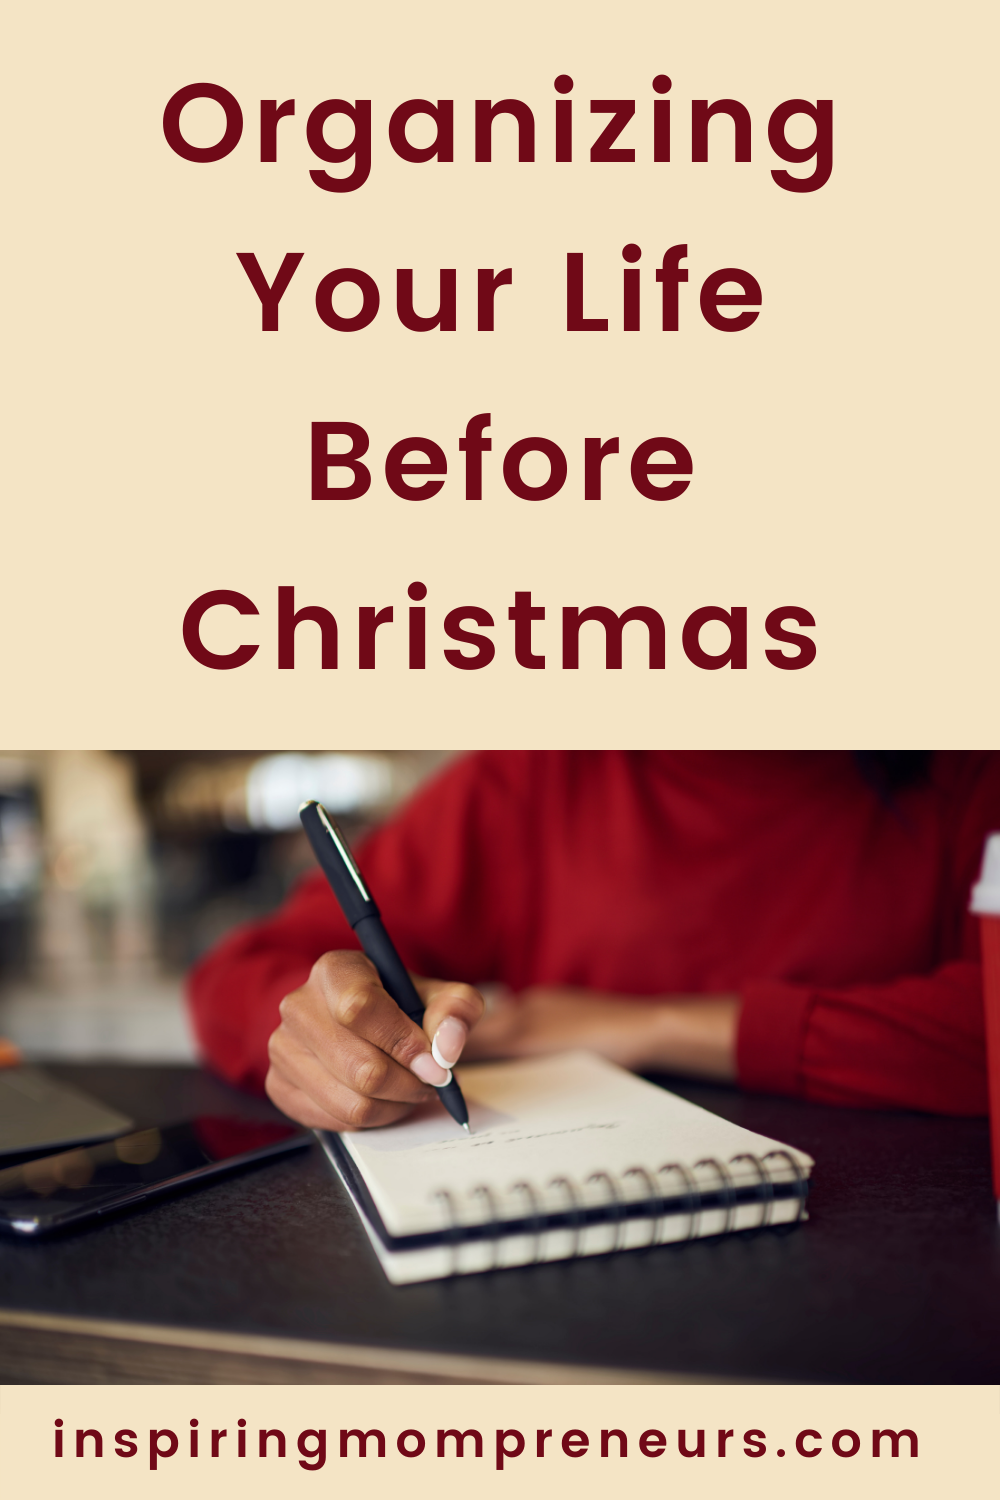 Now that we have only a few months until Christmas, it is time for us to get organised and start to get our lives and our homes ready for the festive season. #getorganized #organizingyourlife #beforechristmas